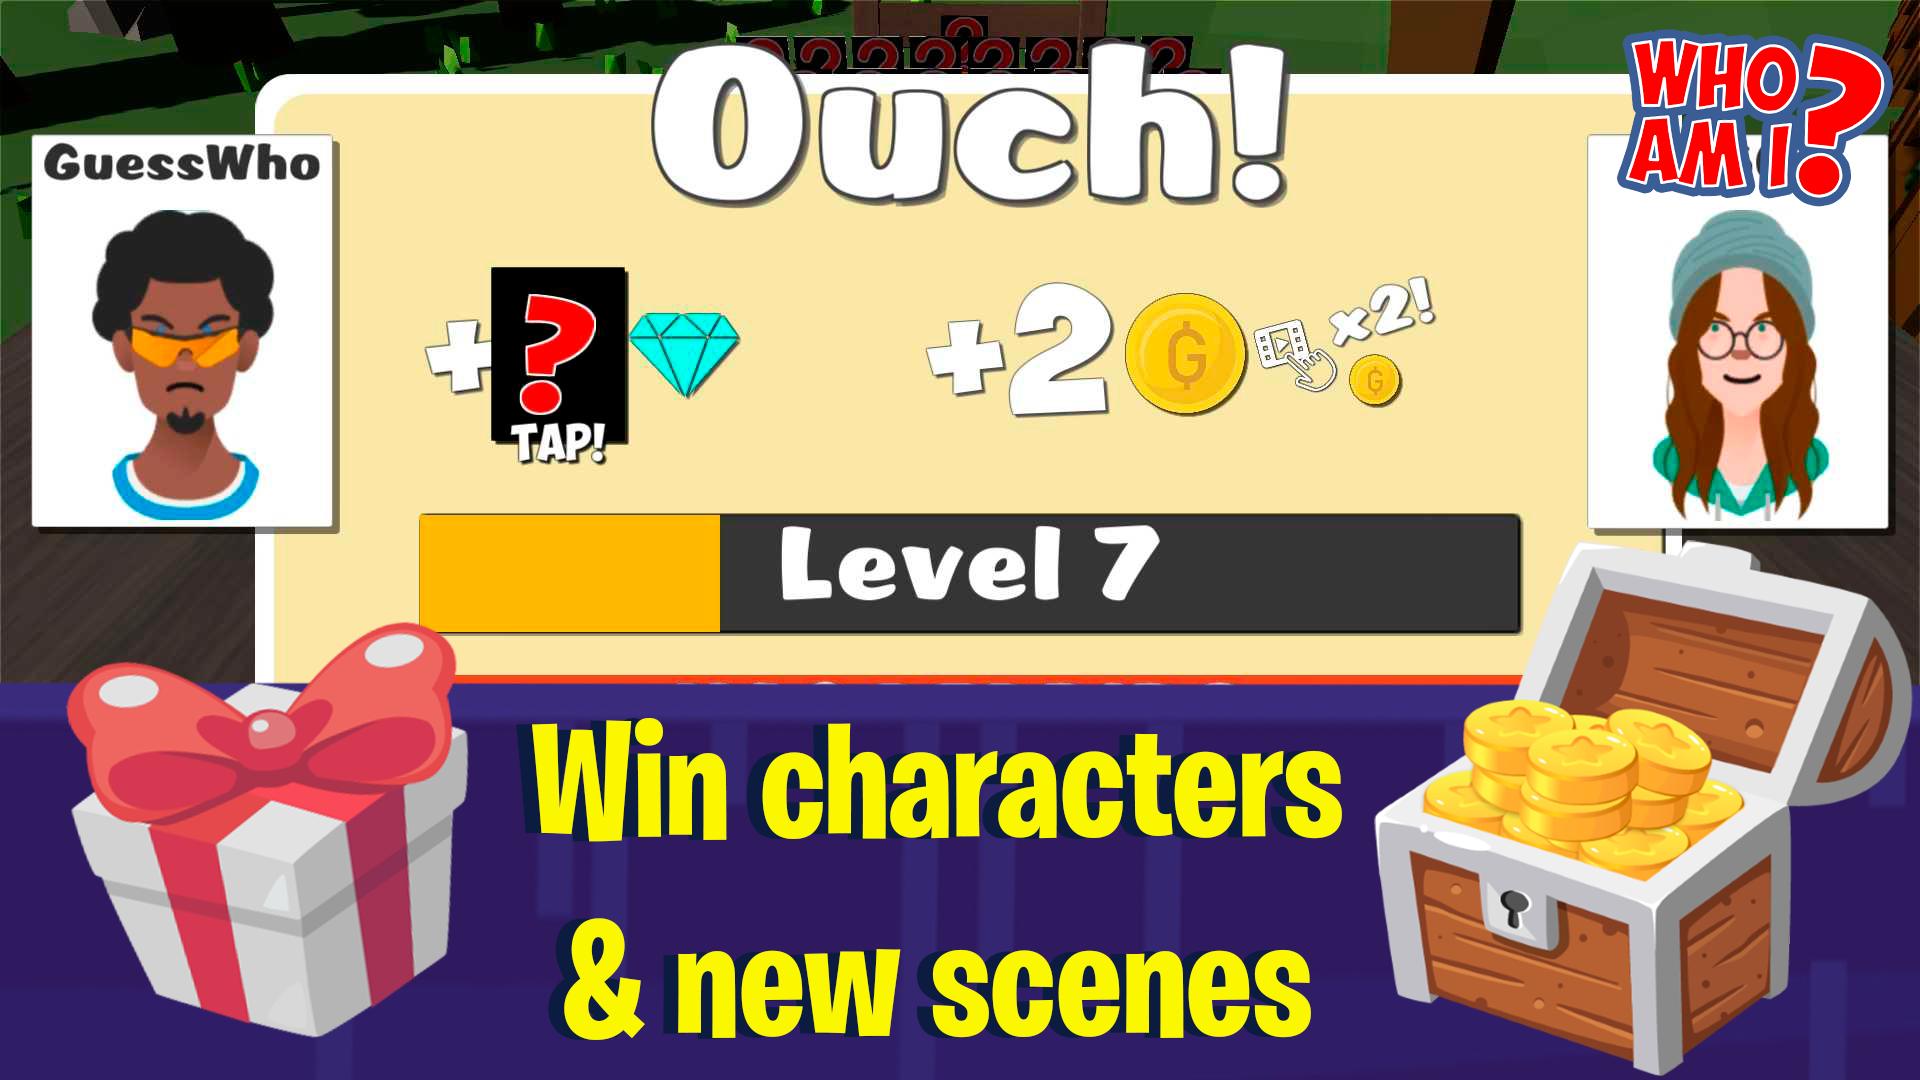 Guess who am I – Who is my character? Board Games 5.0 Screenshot 12